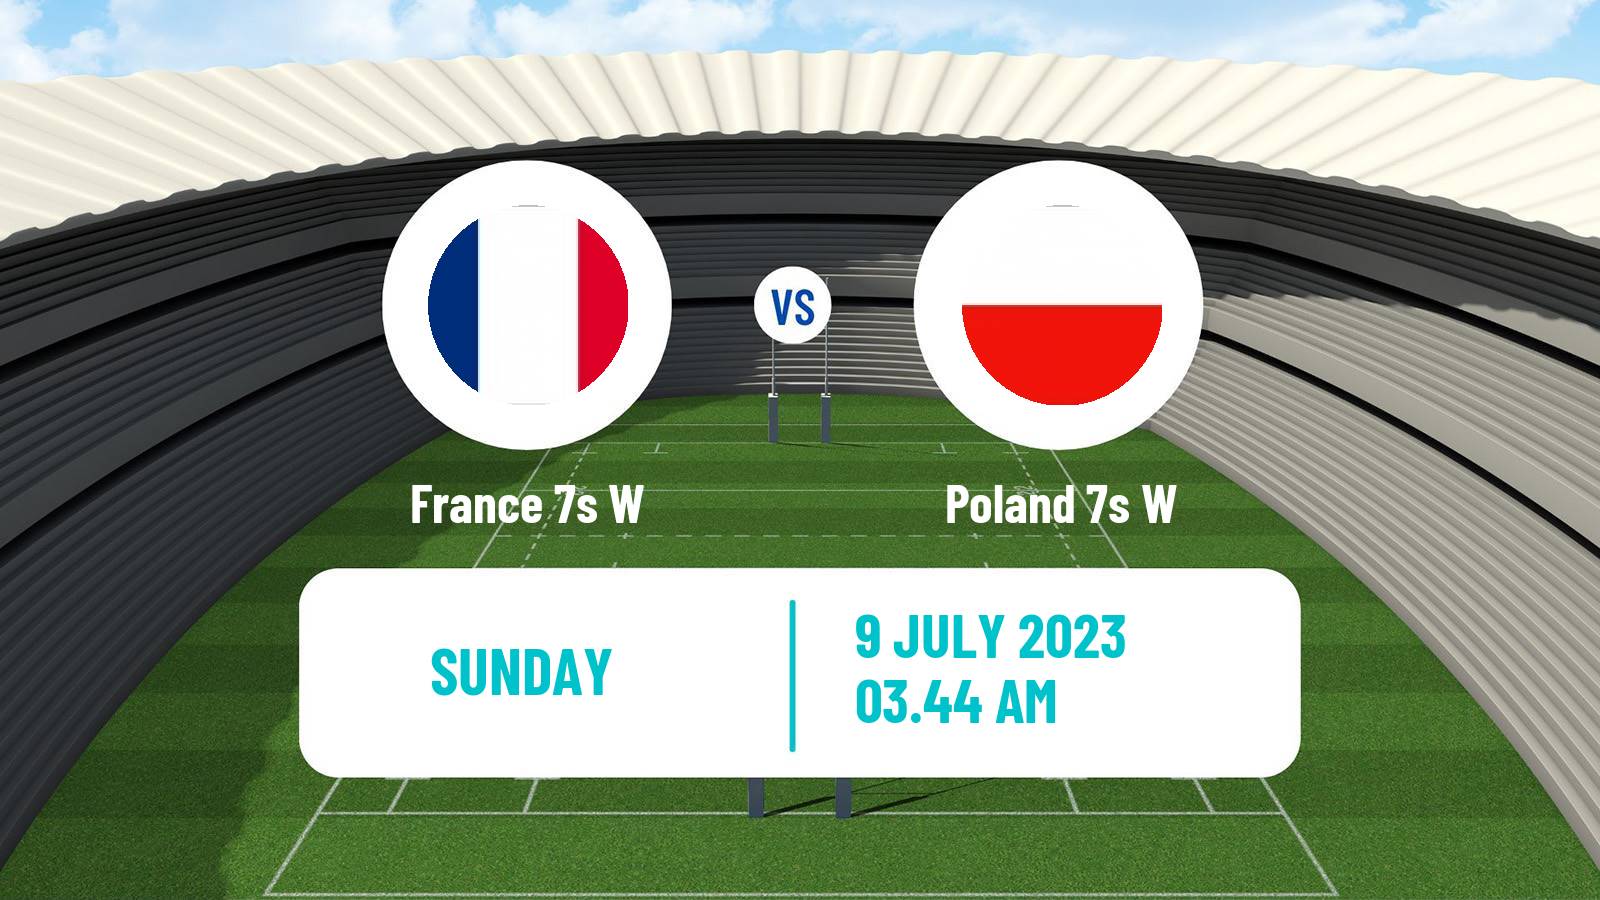 Rugby union Sevens Europe Series Women - Germany France 7s W - Poland 7s W